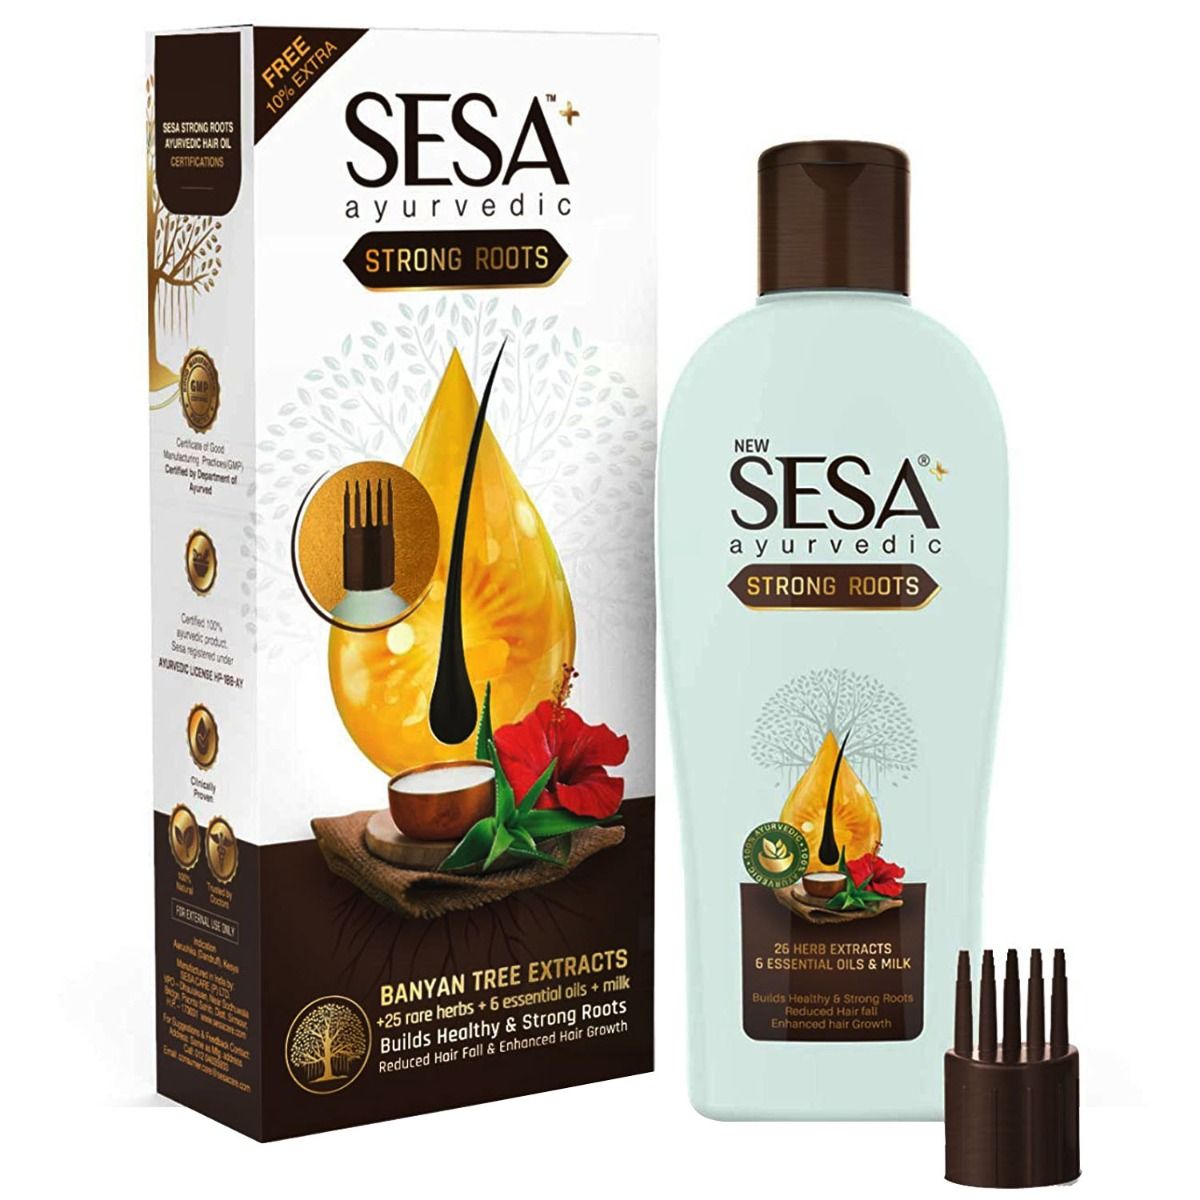 Sesa Ayurvedic Strong Roots Hair Oil  Strong Roots Shampoo Review   Sulphate Free Shampoo  YouTube